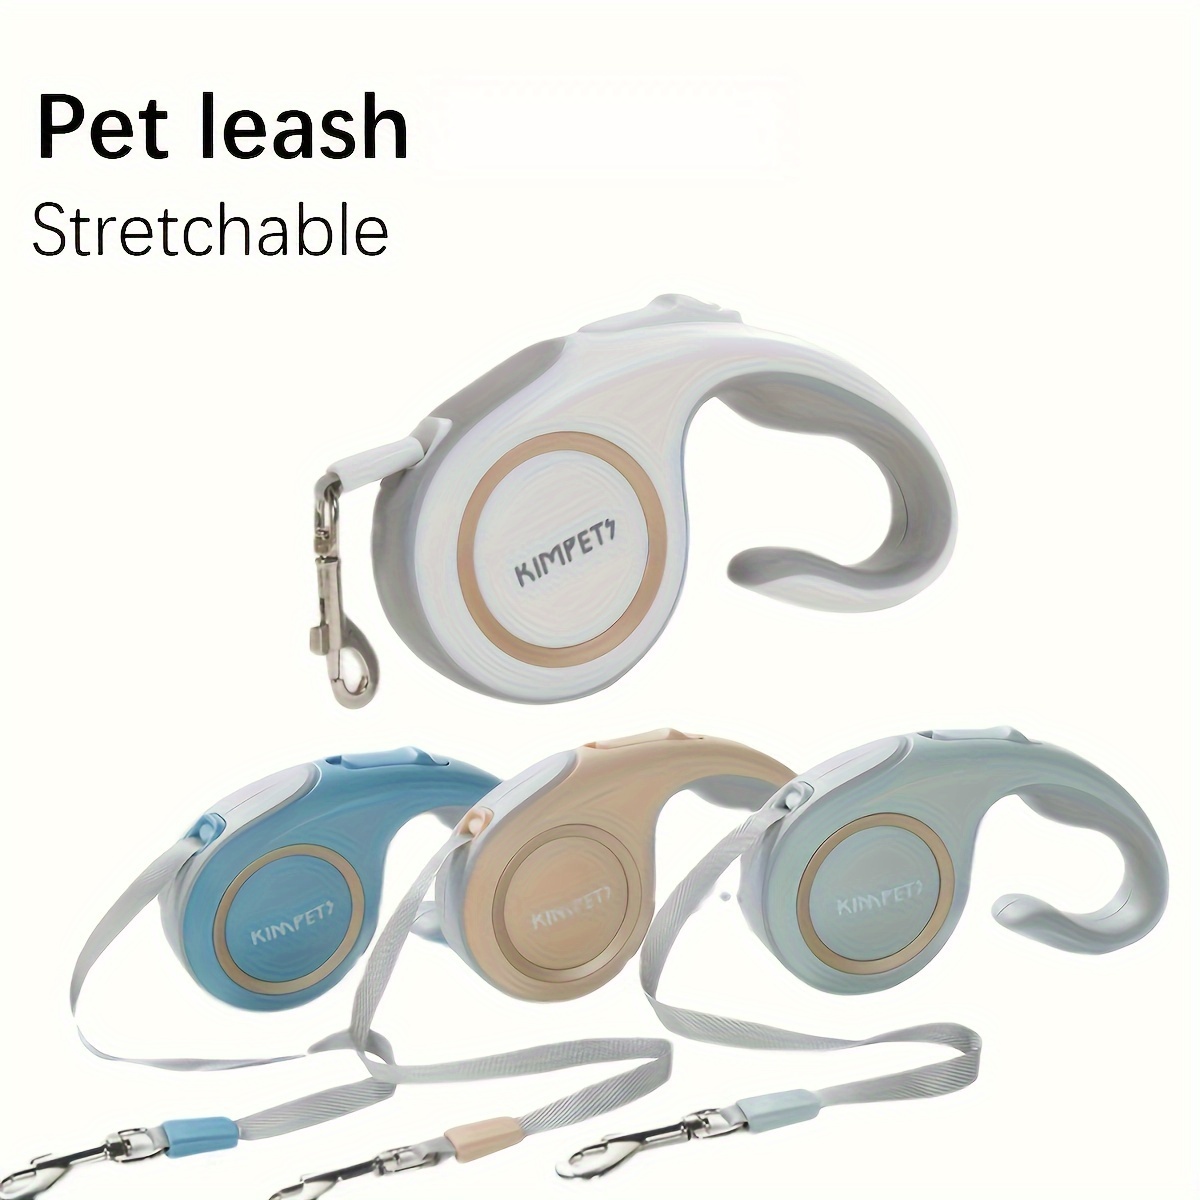 

Retractable Pet Leash For Dogs, With A Length Of 196in/118in, Perfect For Walking Your Furry Friends